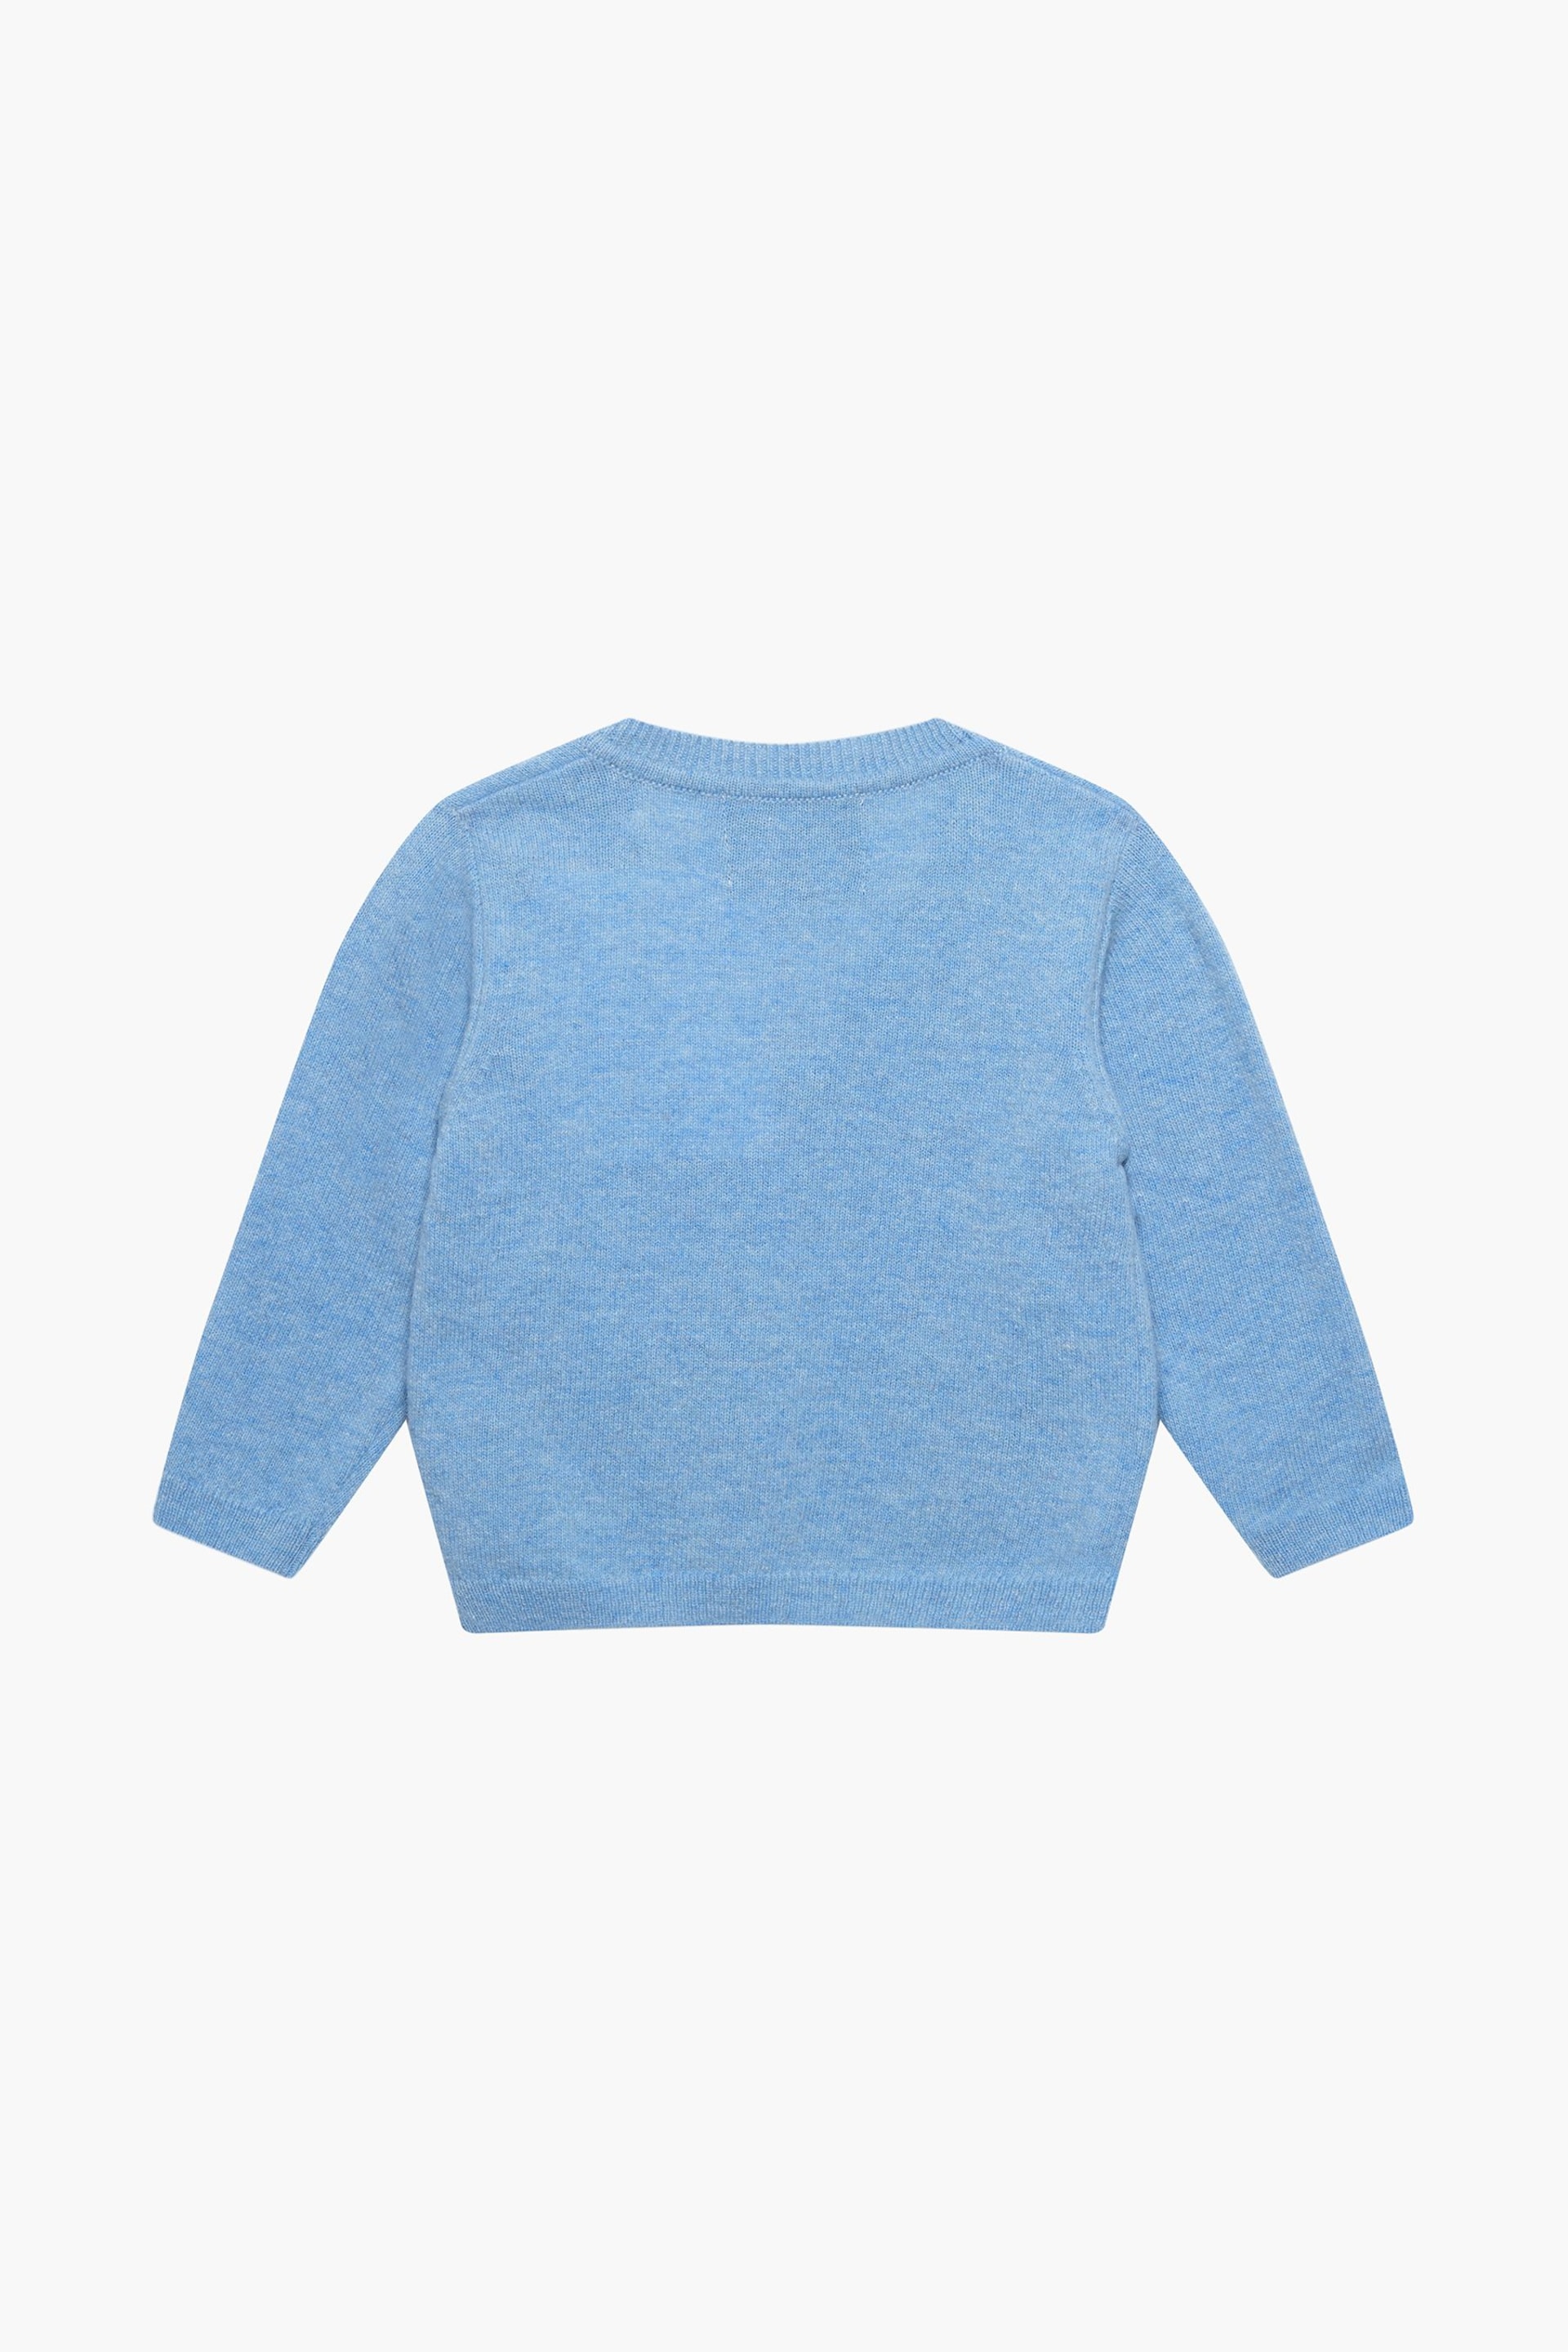 Trotters London Little Blue Marl Augustus And Friends Cardigan - Image 2 of 3